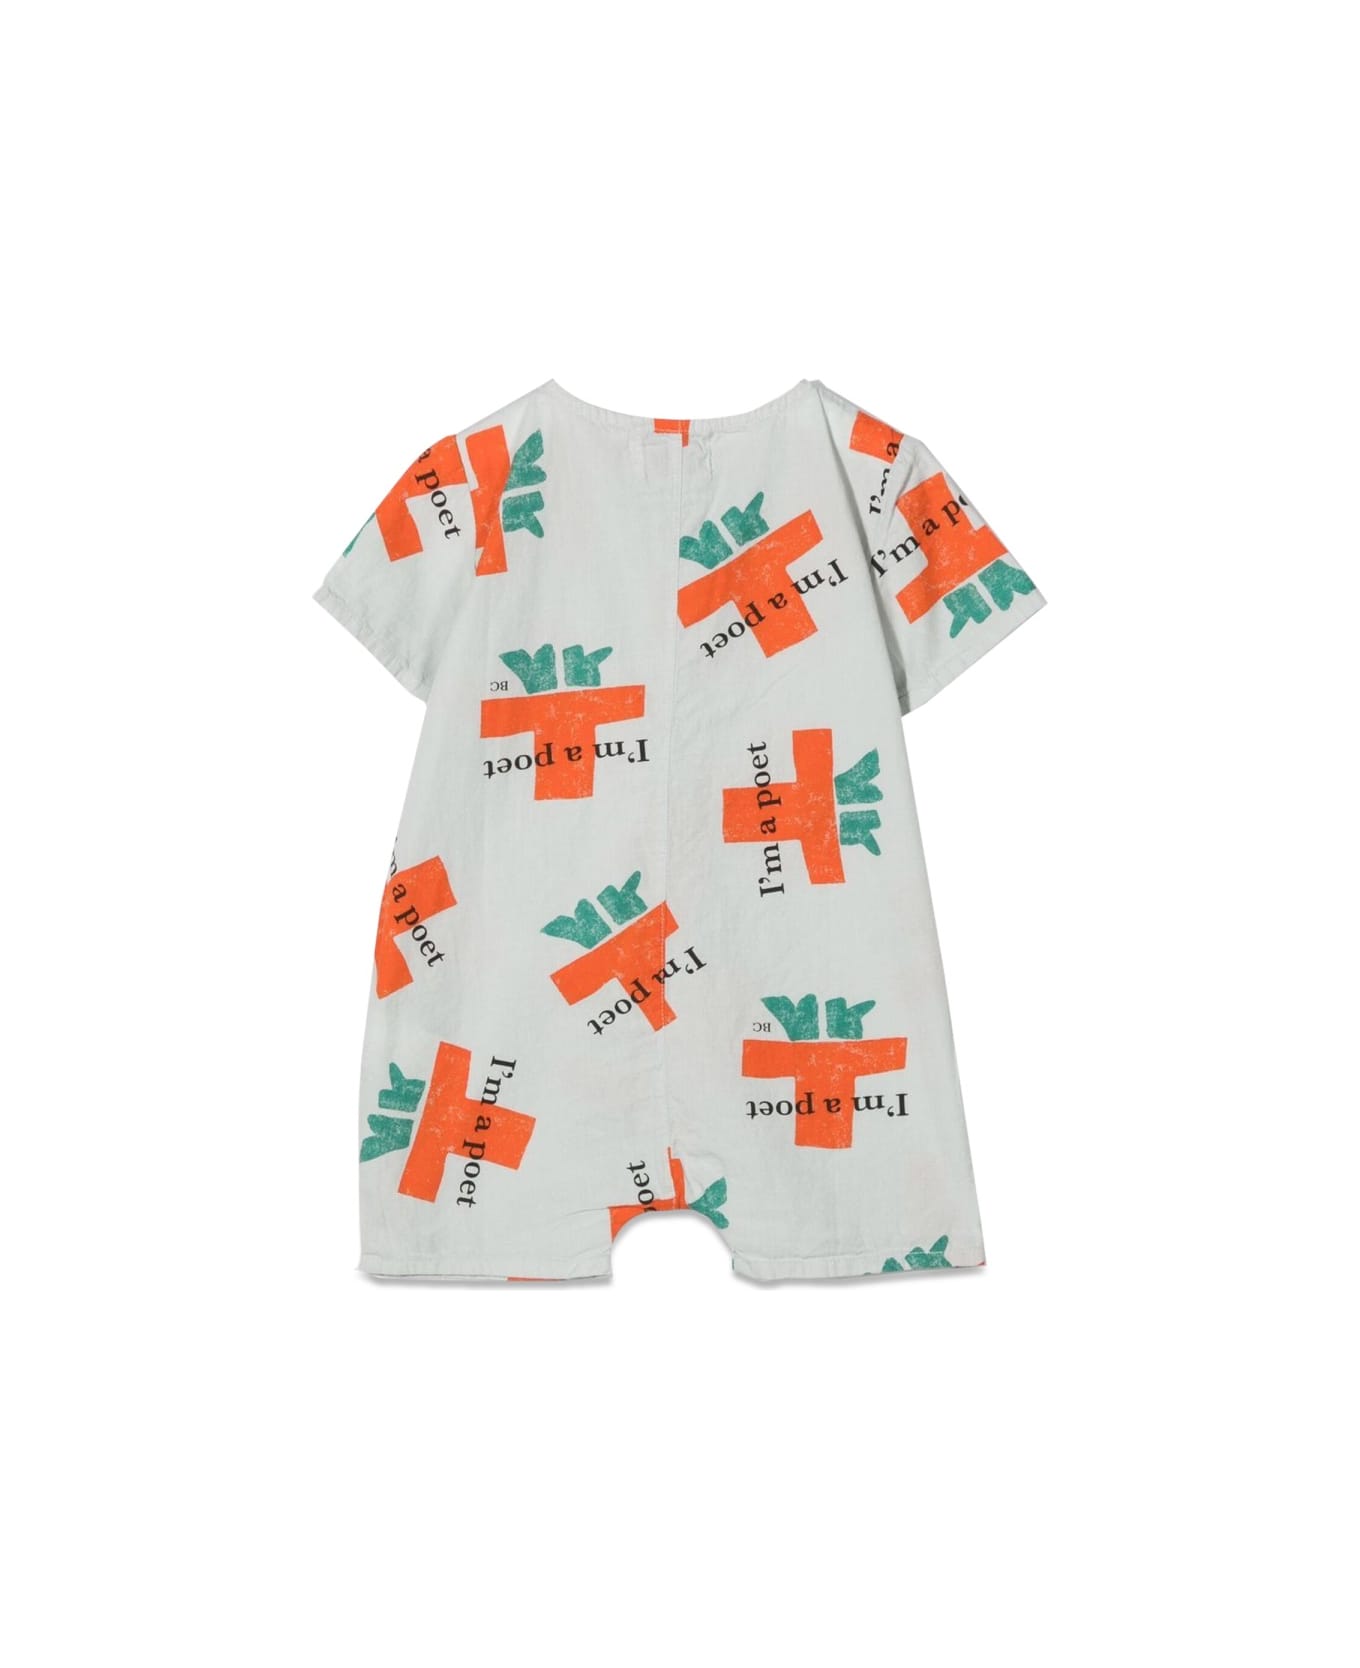 Bobo Choses I'm A Poet All Over Woven Playsuit - MULTICOLOUR